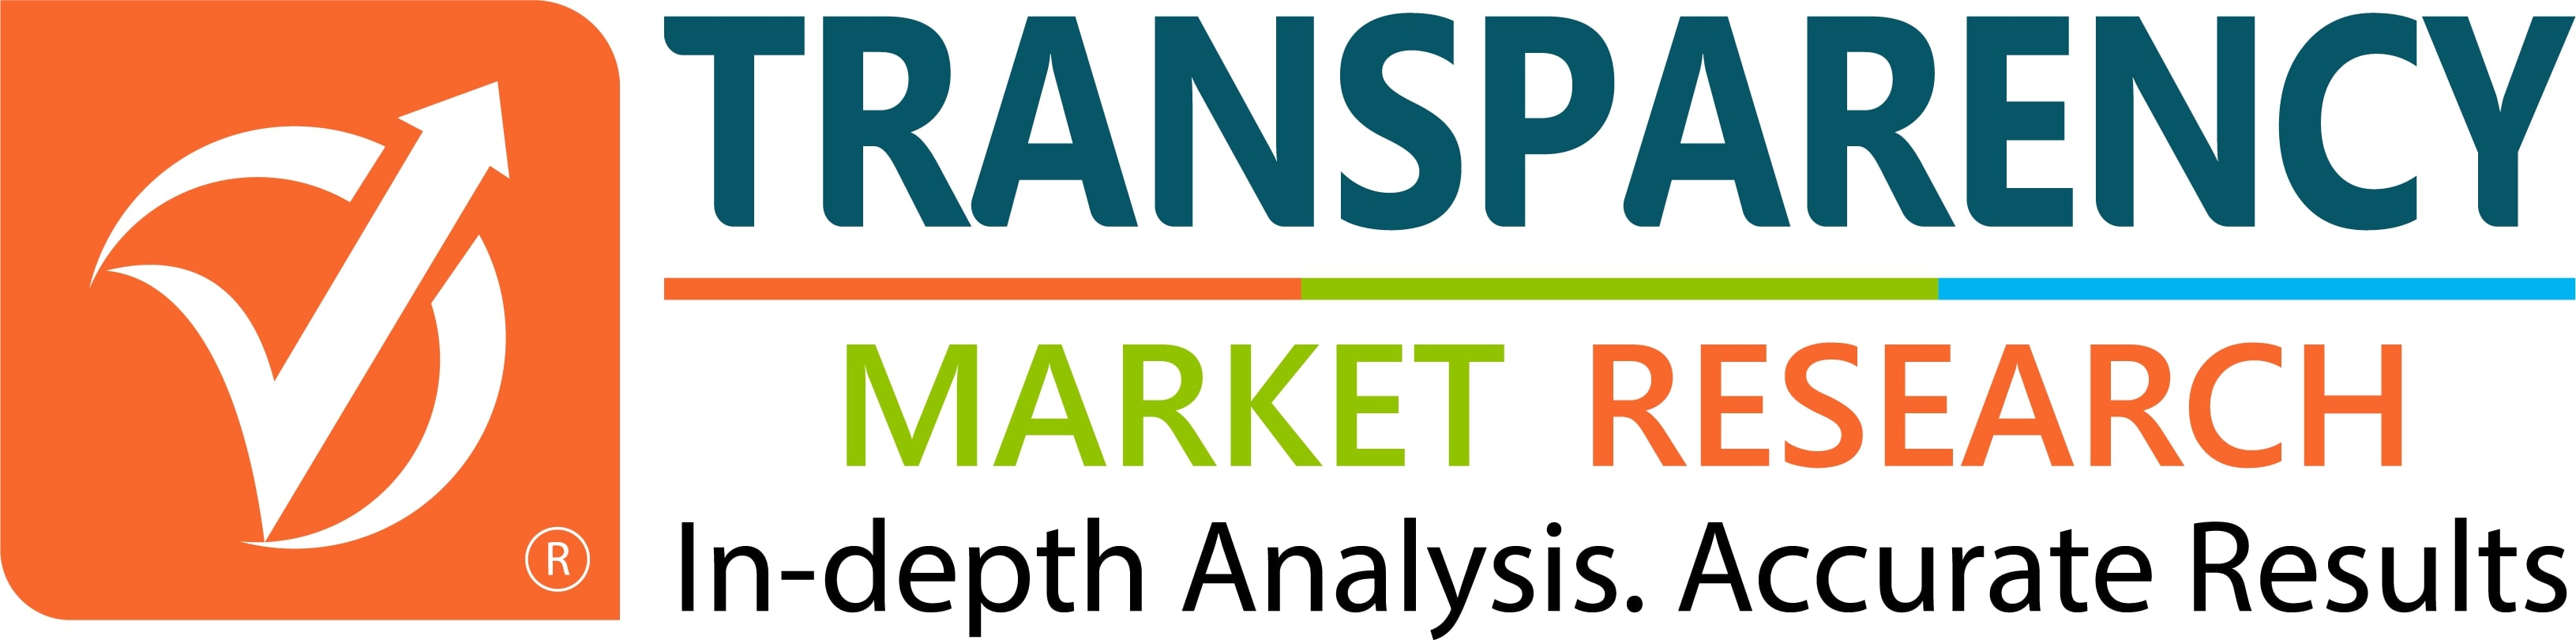 Bone Graft Substitutes Market Booming Demand Leading to Exponential CAGR Growth By 2030